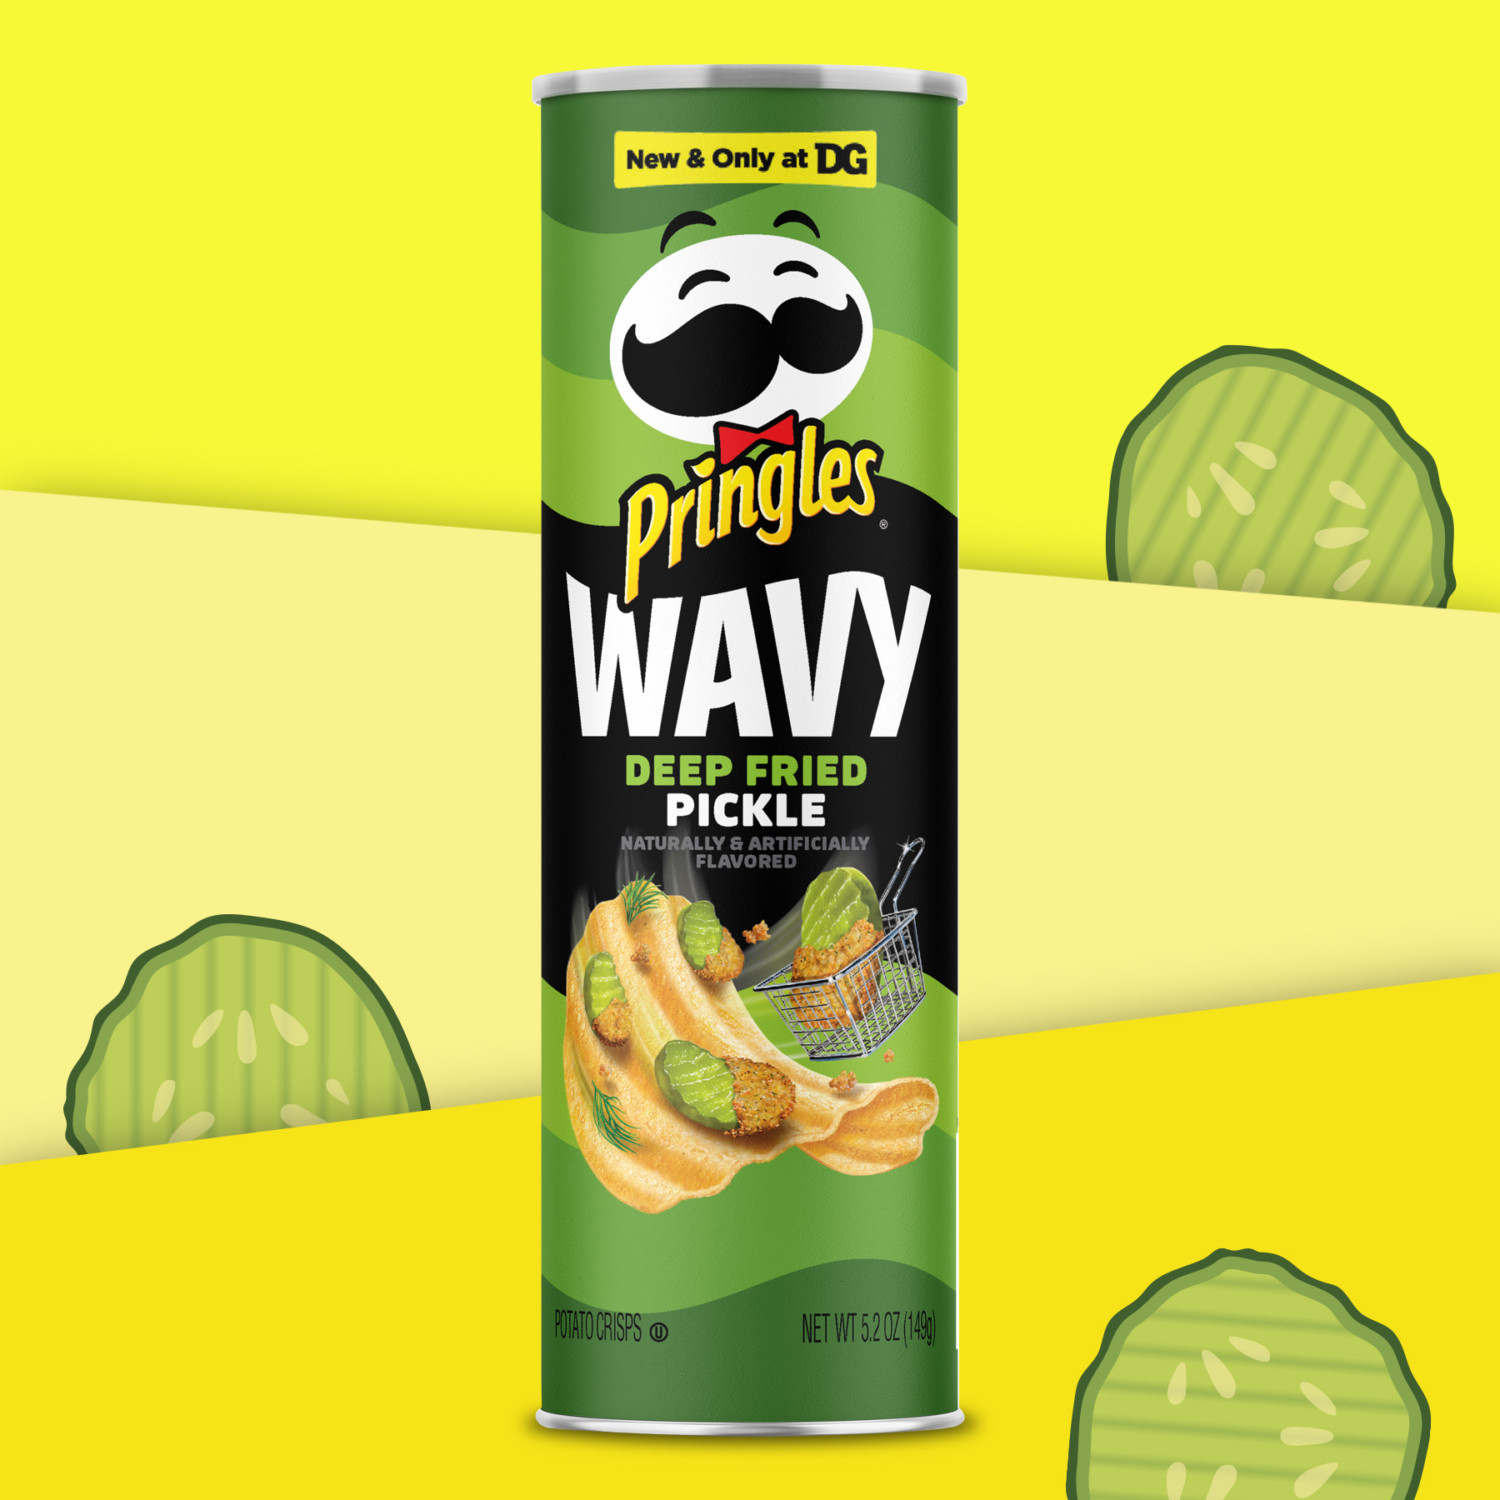 Deep-fried pickle Pringles are now available for a limited time